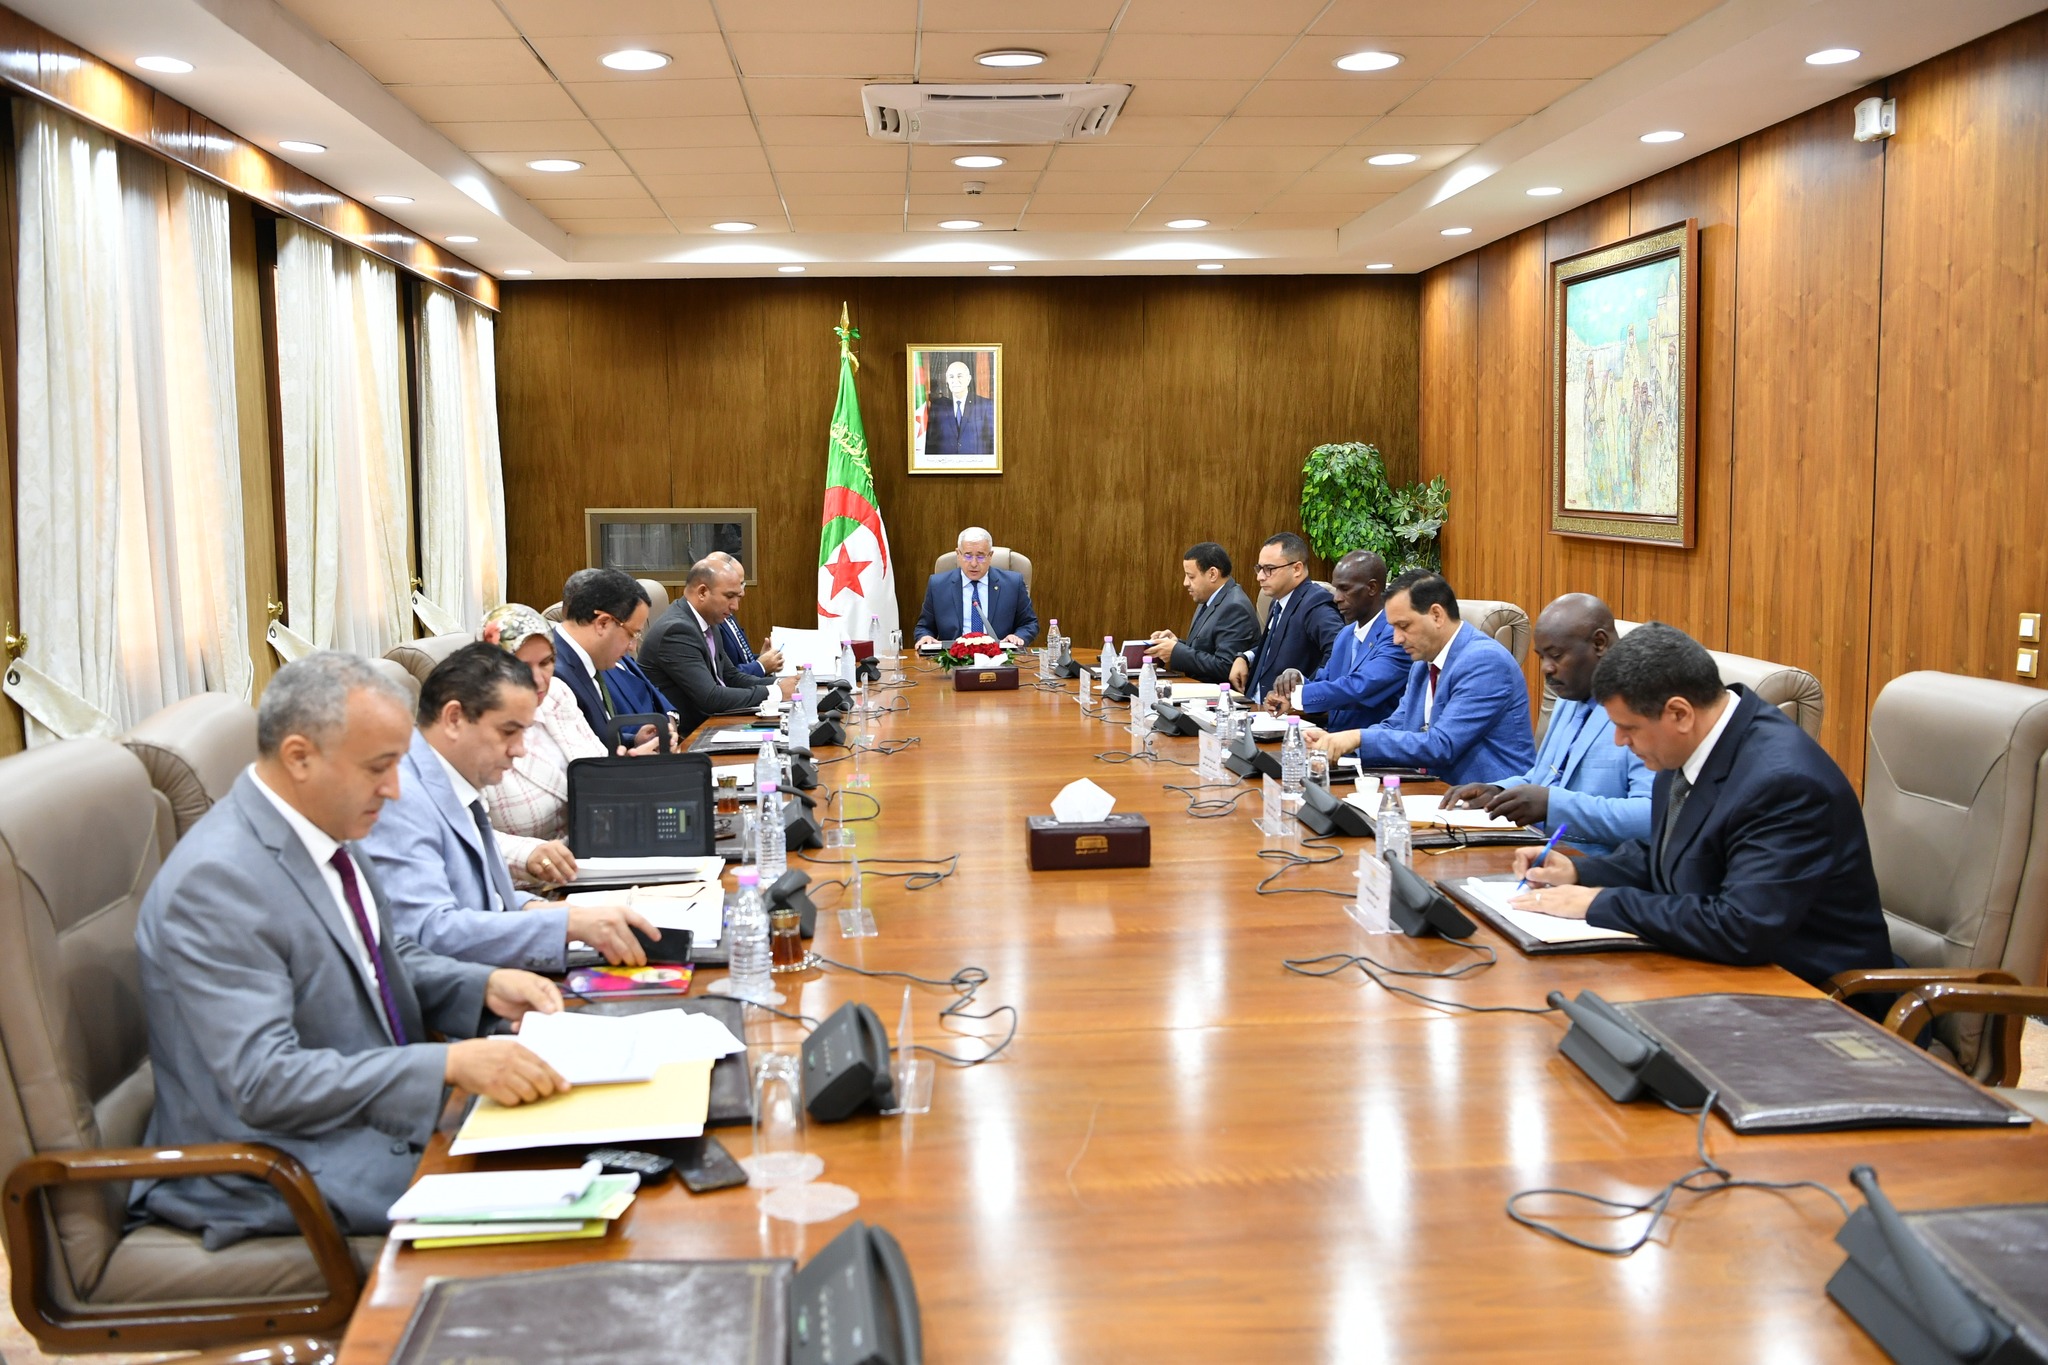 The Office of the National People's Assembly sets the schedule for plenary sessions - Algerian Dialogue